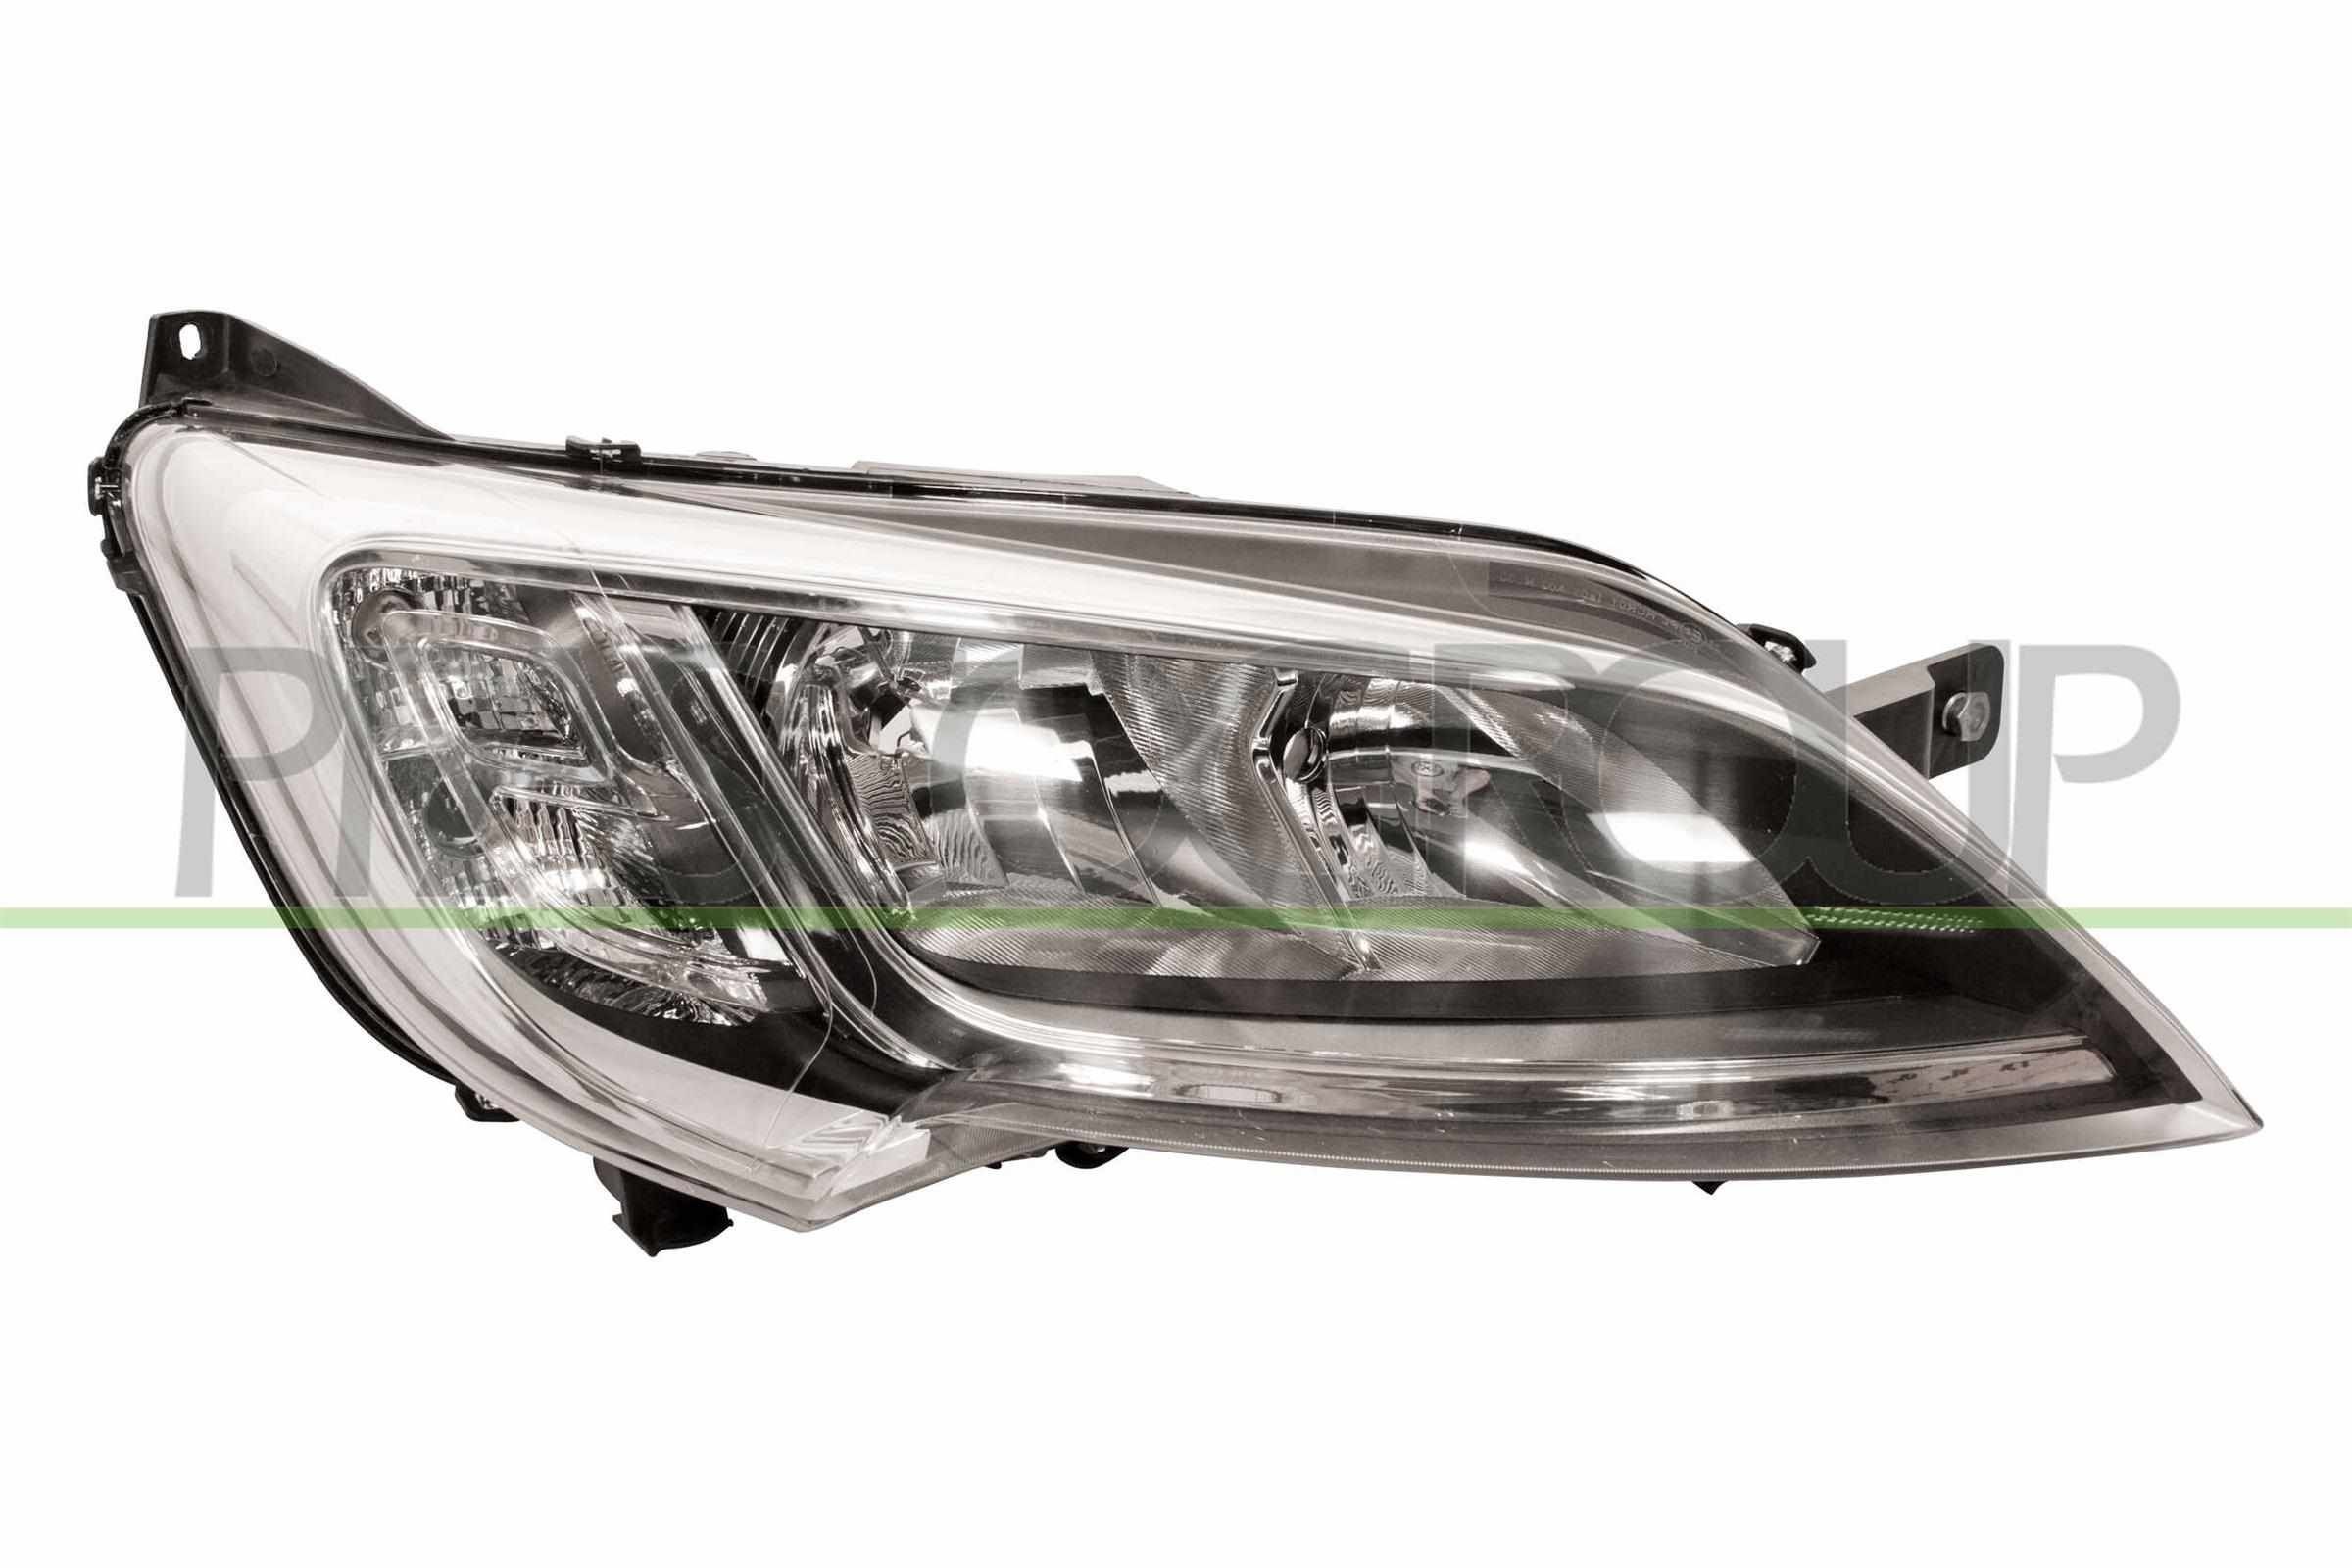 PRASCO FT9324913 Headlight Right, H7/H7, with motor for headlamp levelling